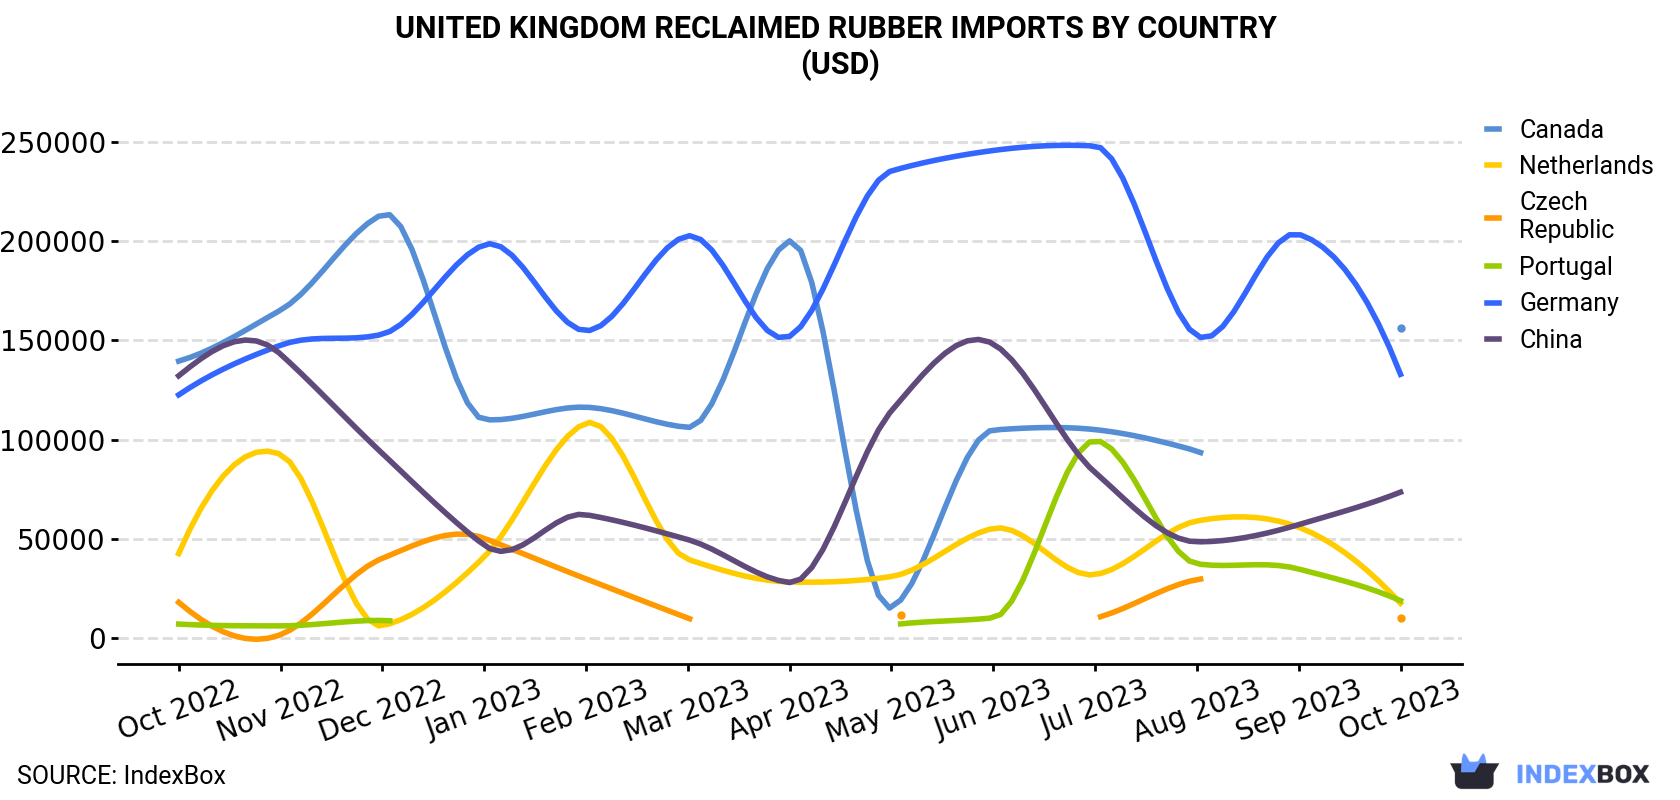 United Kingdom Reclaimed Rubber Imports By Country (USD)